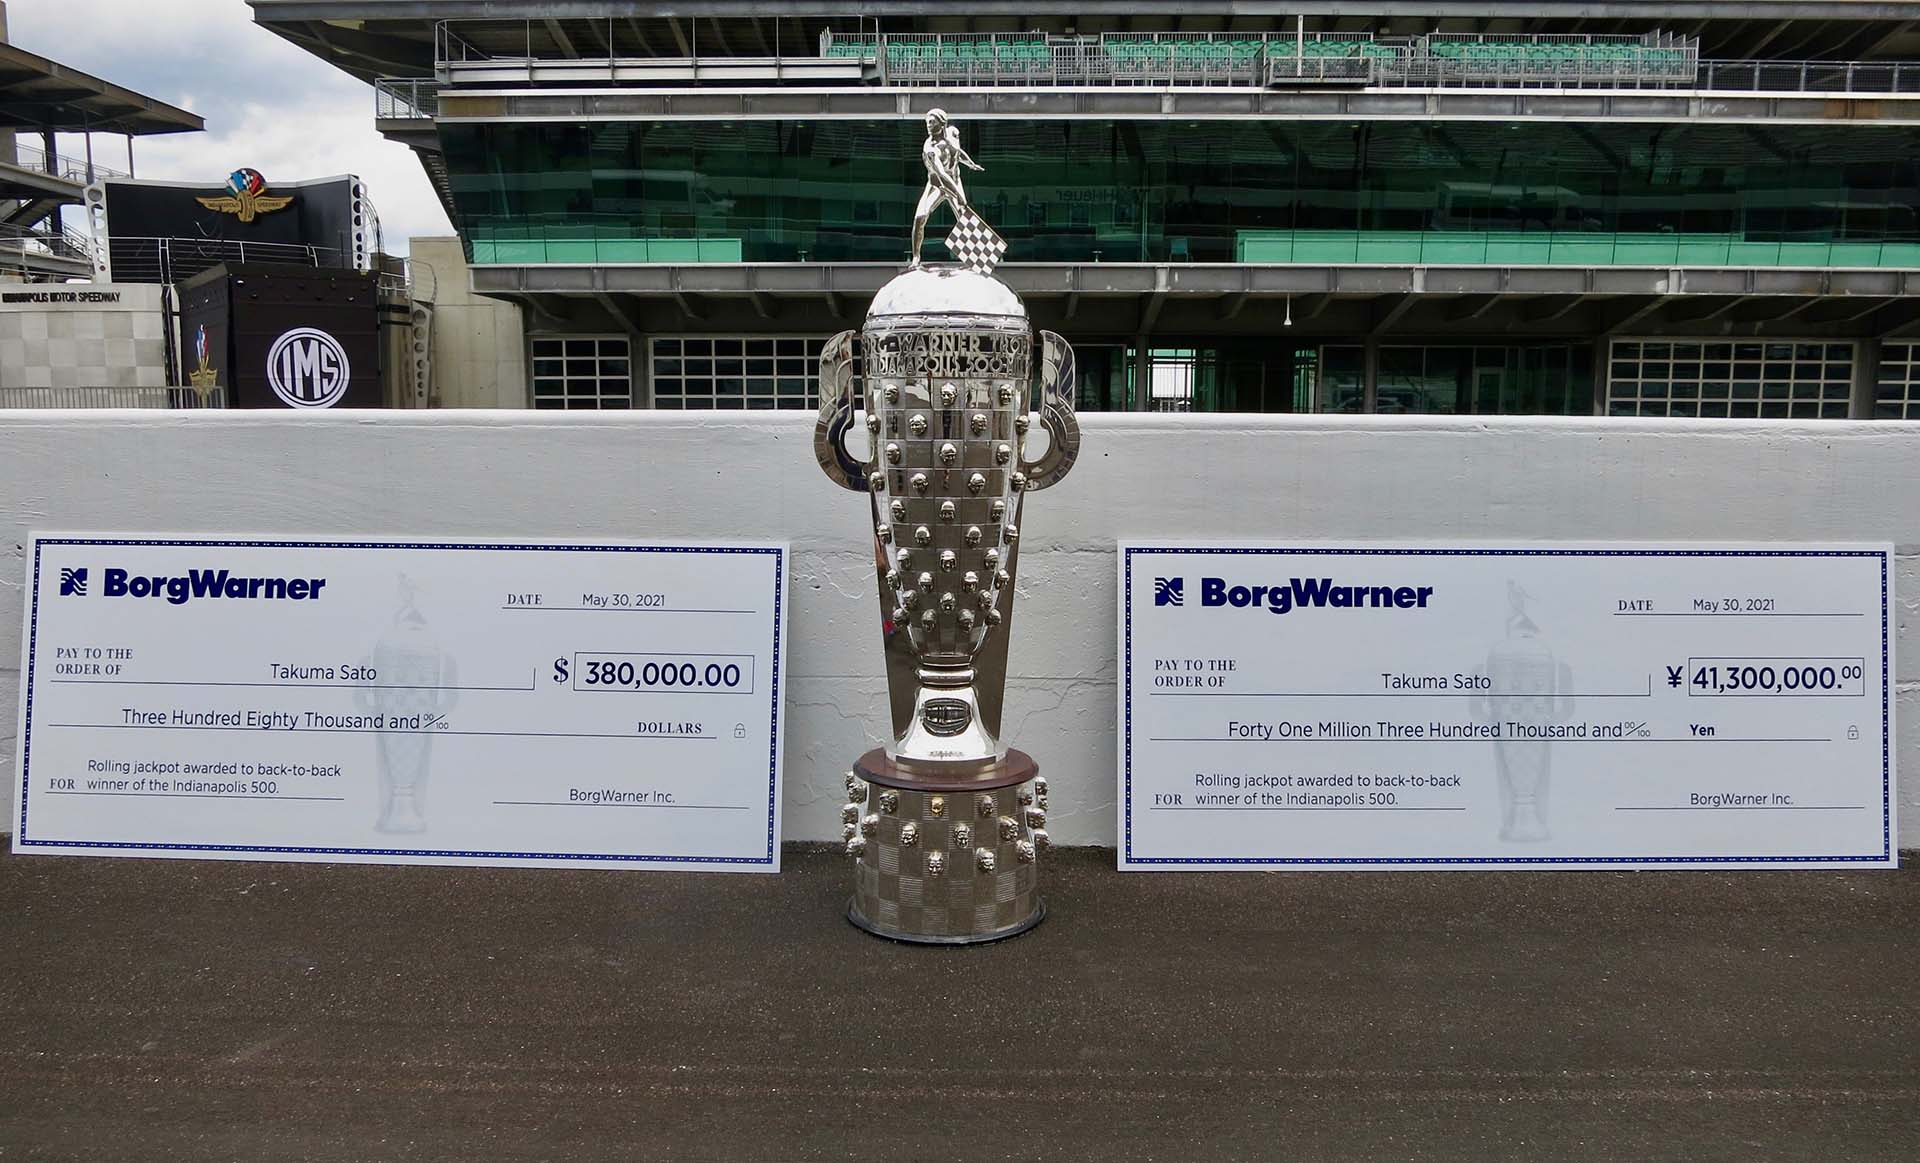 Large silver trophy with two large checks on either side on race track with stands in background